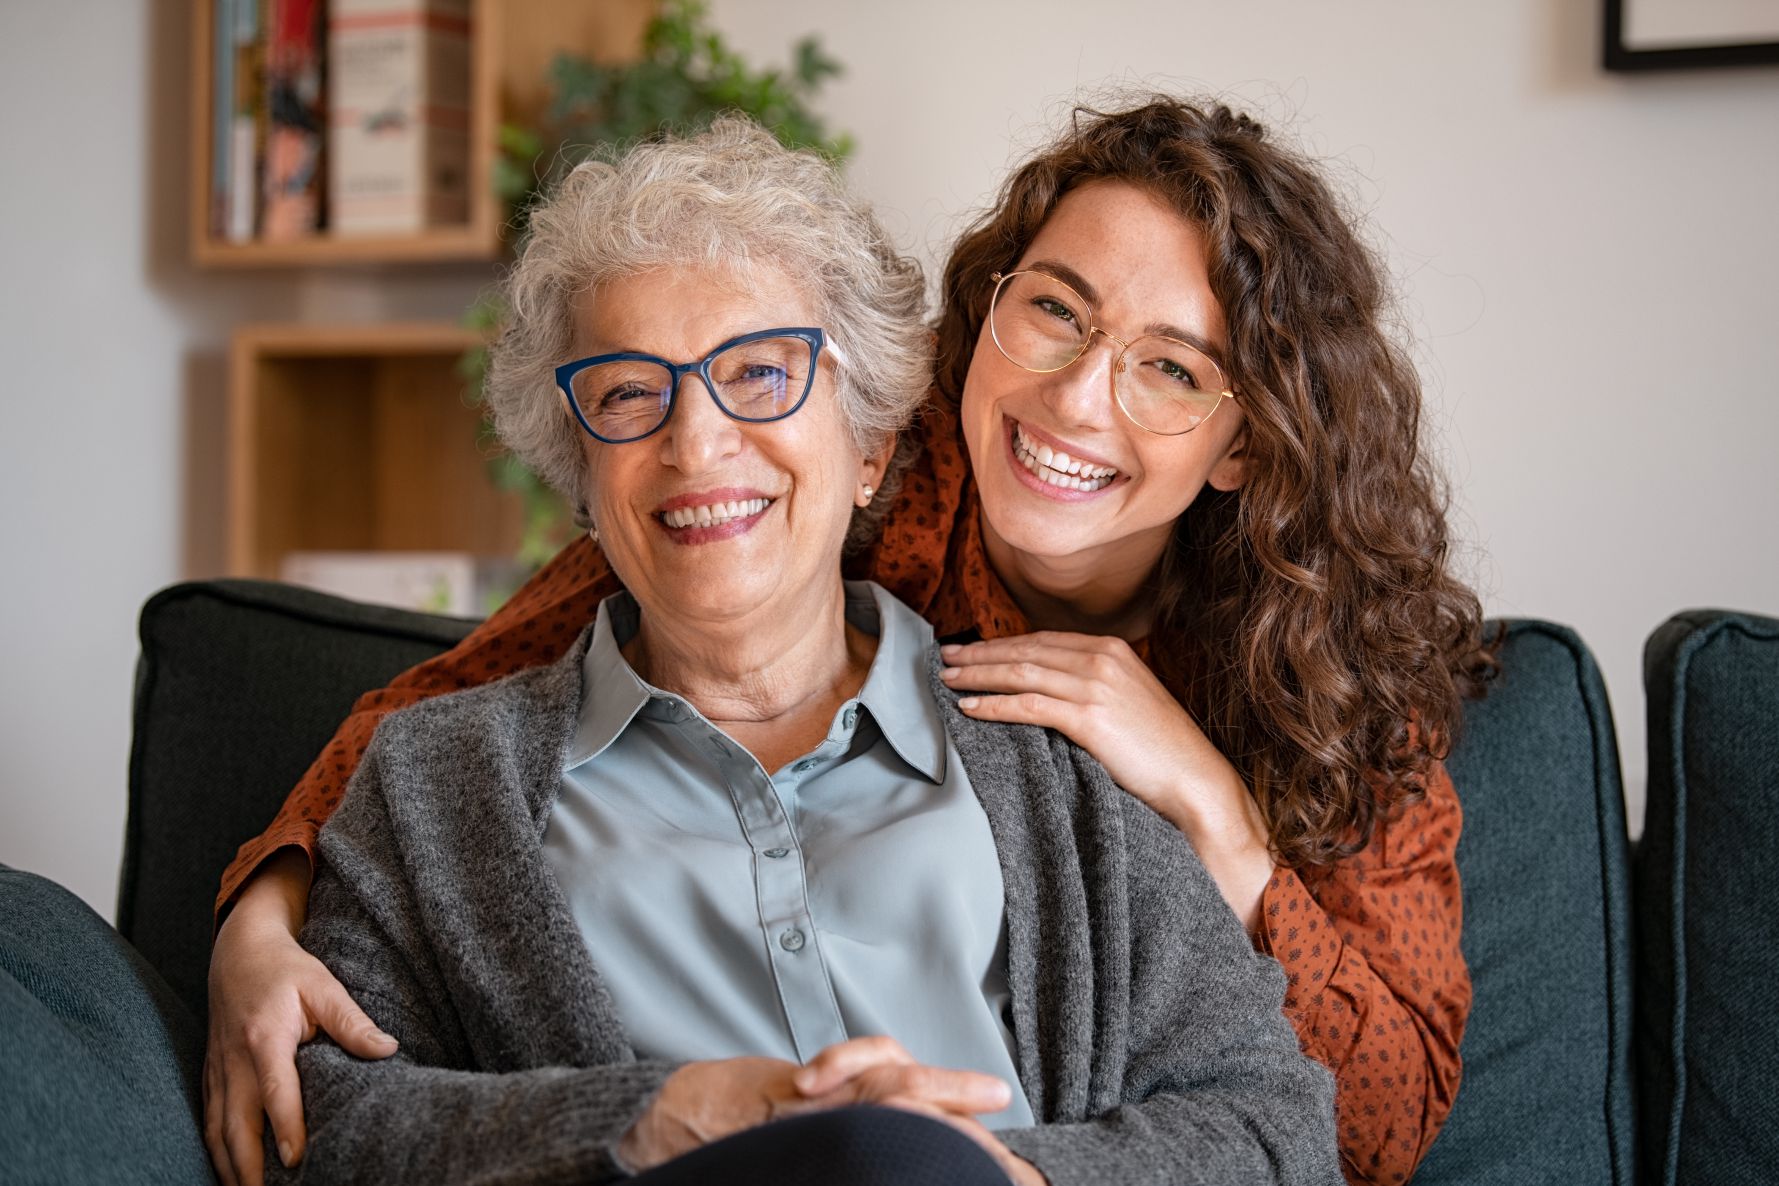 Portrait of old grandma and adult granddaughter hugging with love on sofa while looking at camera. Happy young woman with eyeglasses hugging from behind older grandma with spectacles. Senior woman spending time with her beautiful daughter, generation family concept.